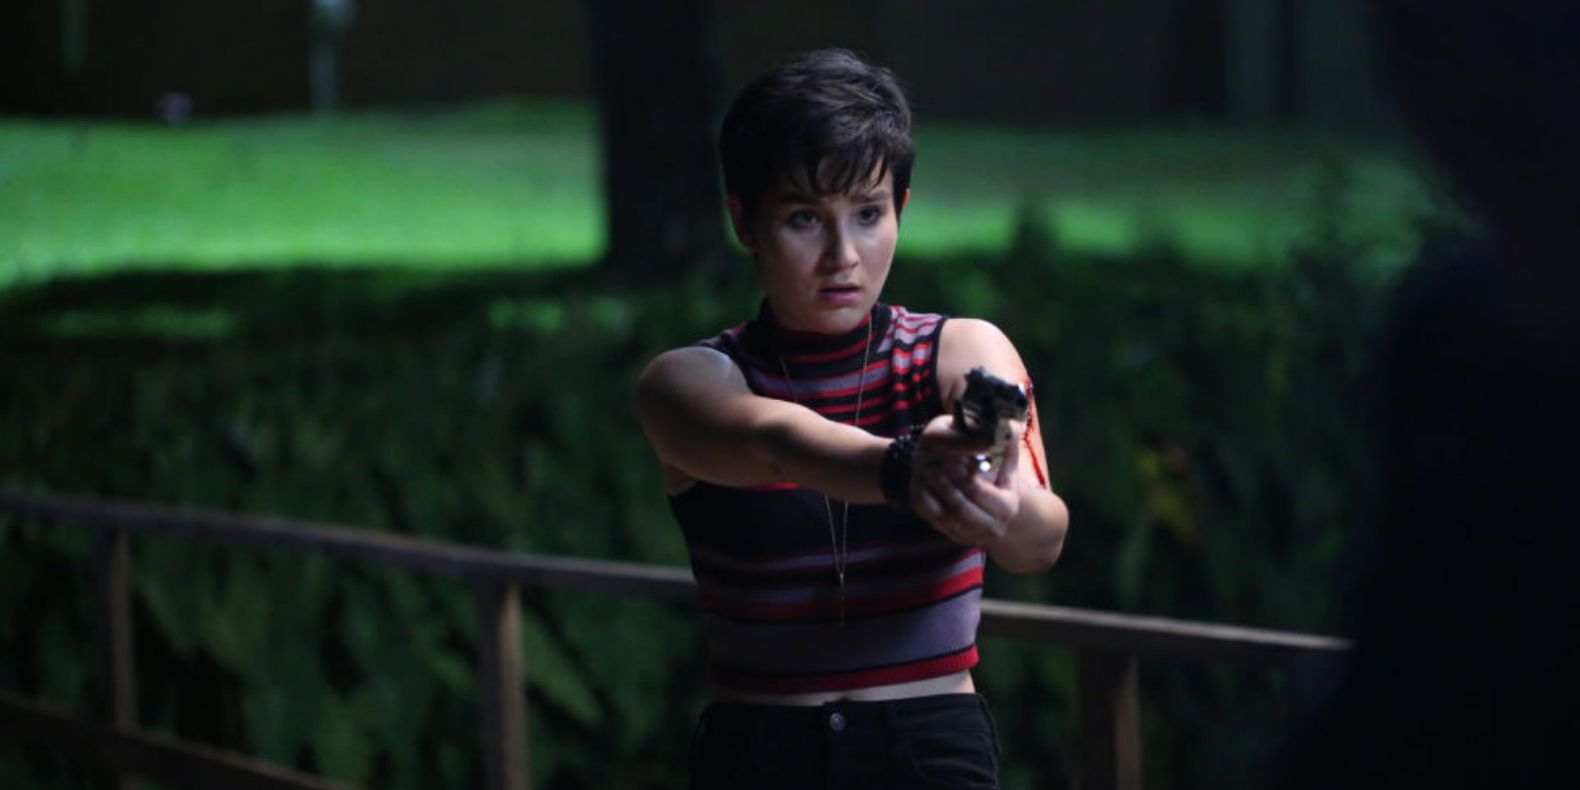 Audrey shoots Piper in the Scream episode Revelations